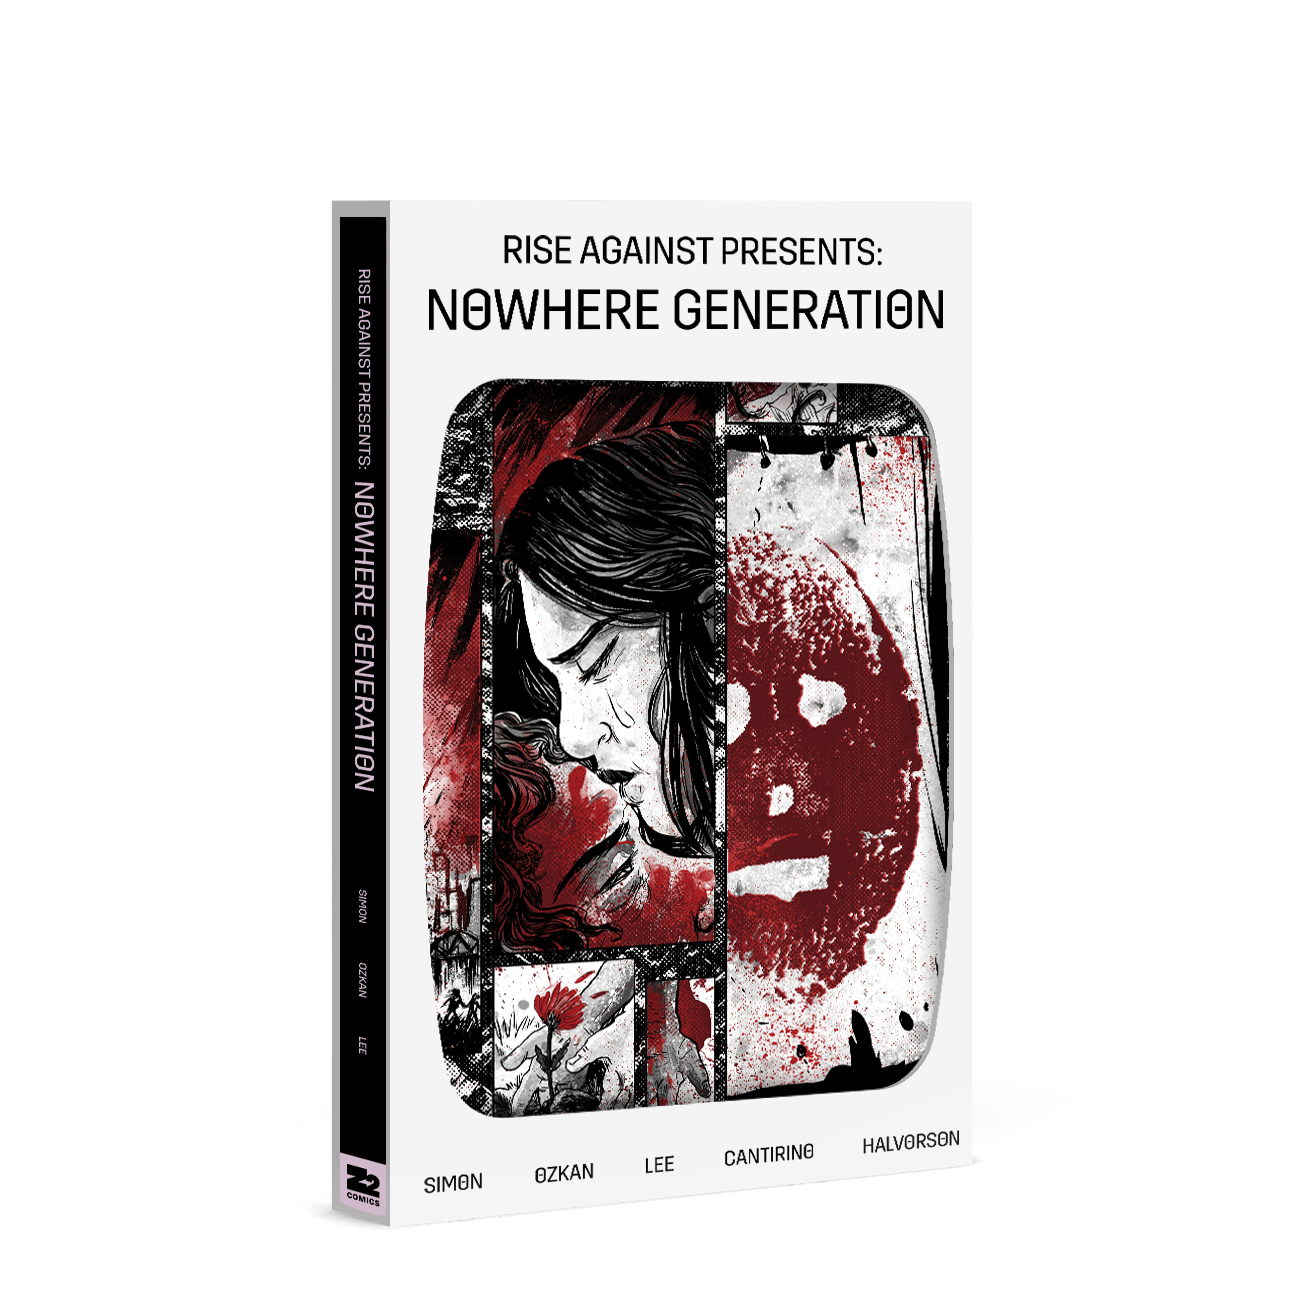 RISE AGAINST PRESENTS: NOWHERE GENERATION DELUXE EDITION BOOK WITH VINYL